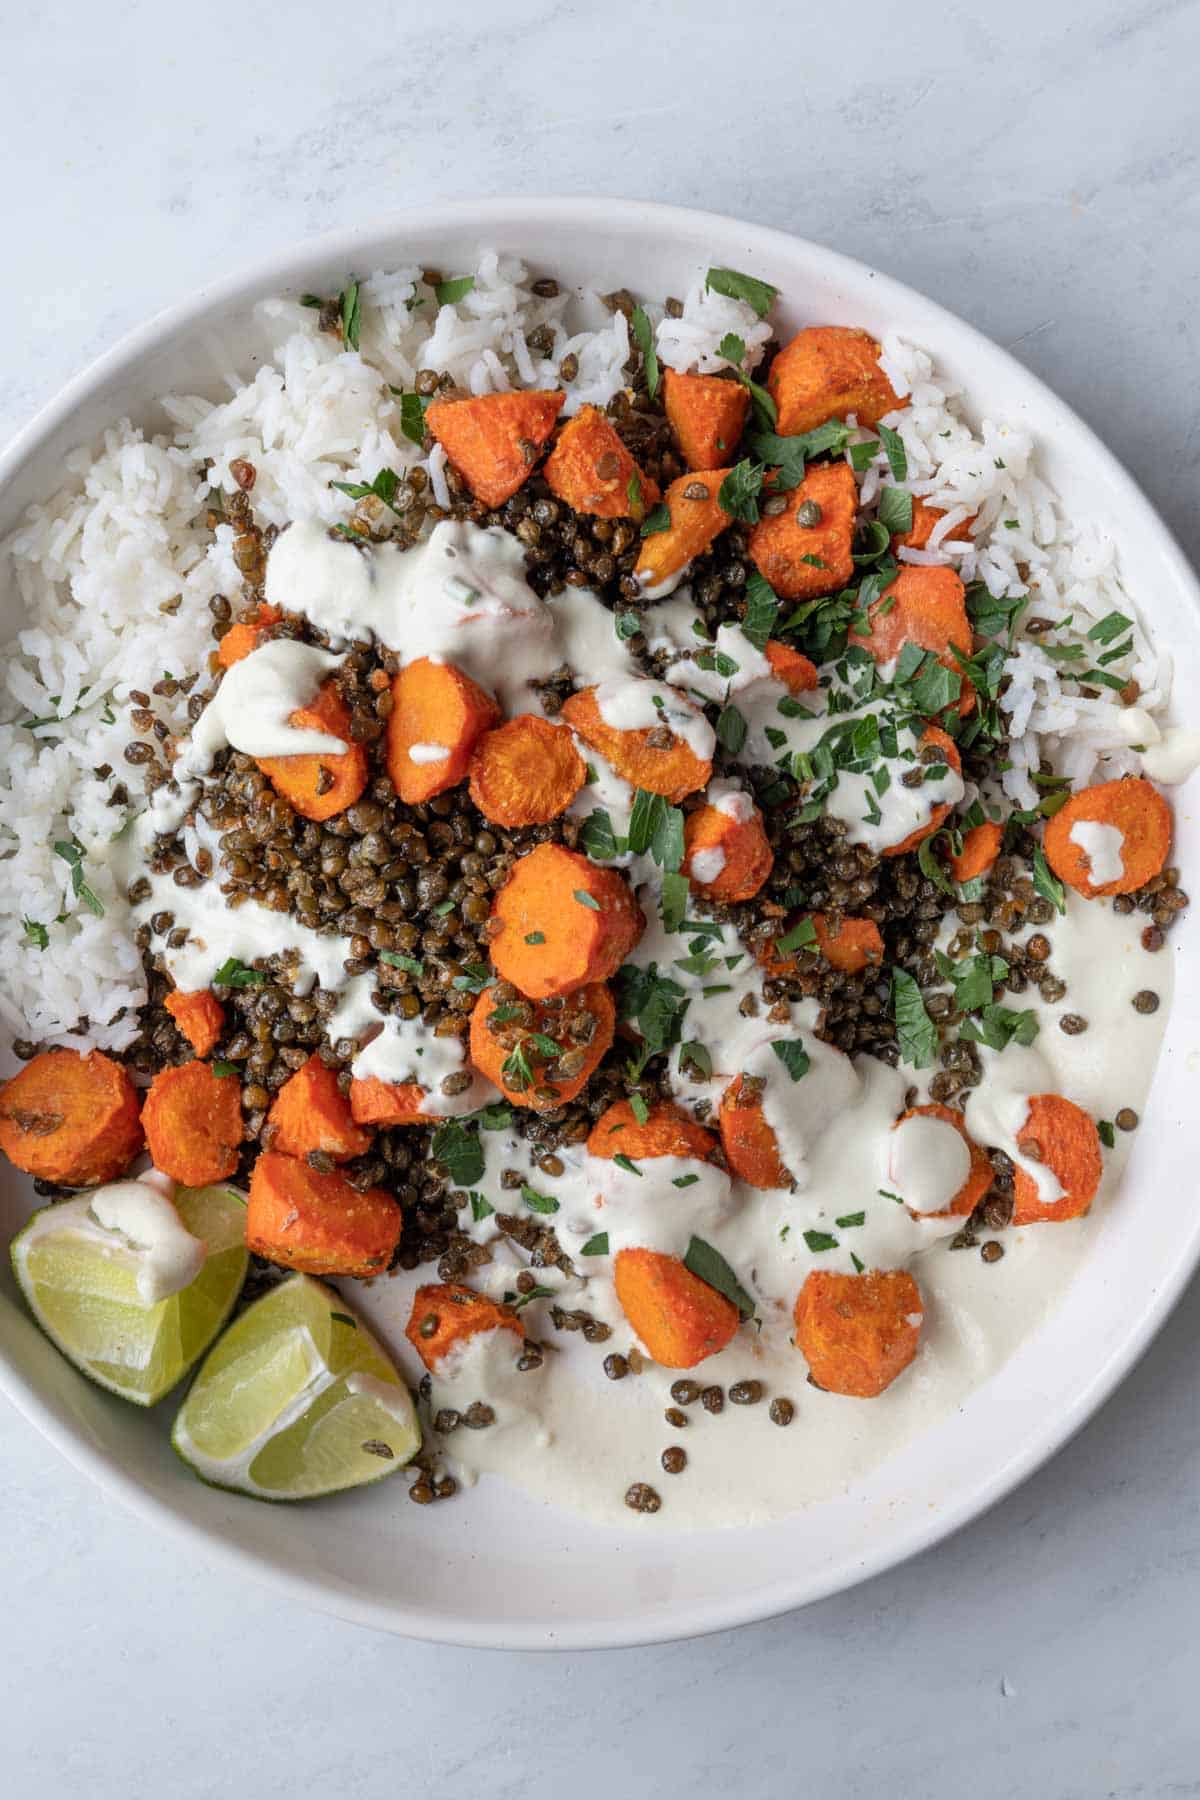 Buddha Bowl with roasted Puy lentils and carrot rounds on a bed of white rice with creamy white dressing, two lime wedges, and chopped parsley in a white bowl.